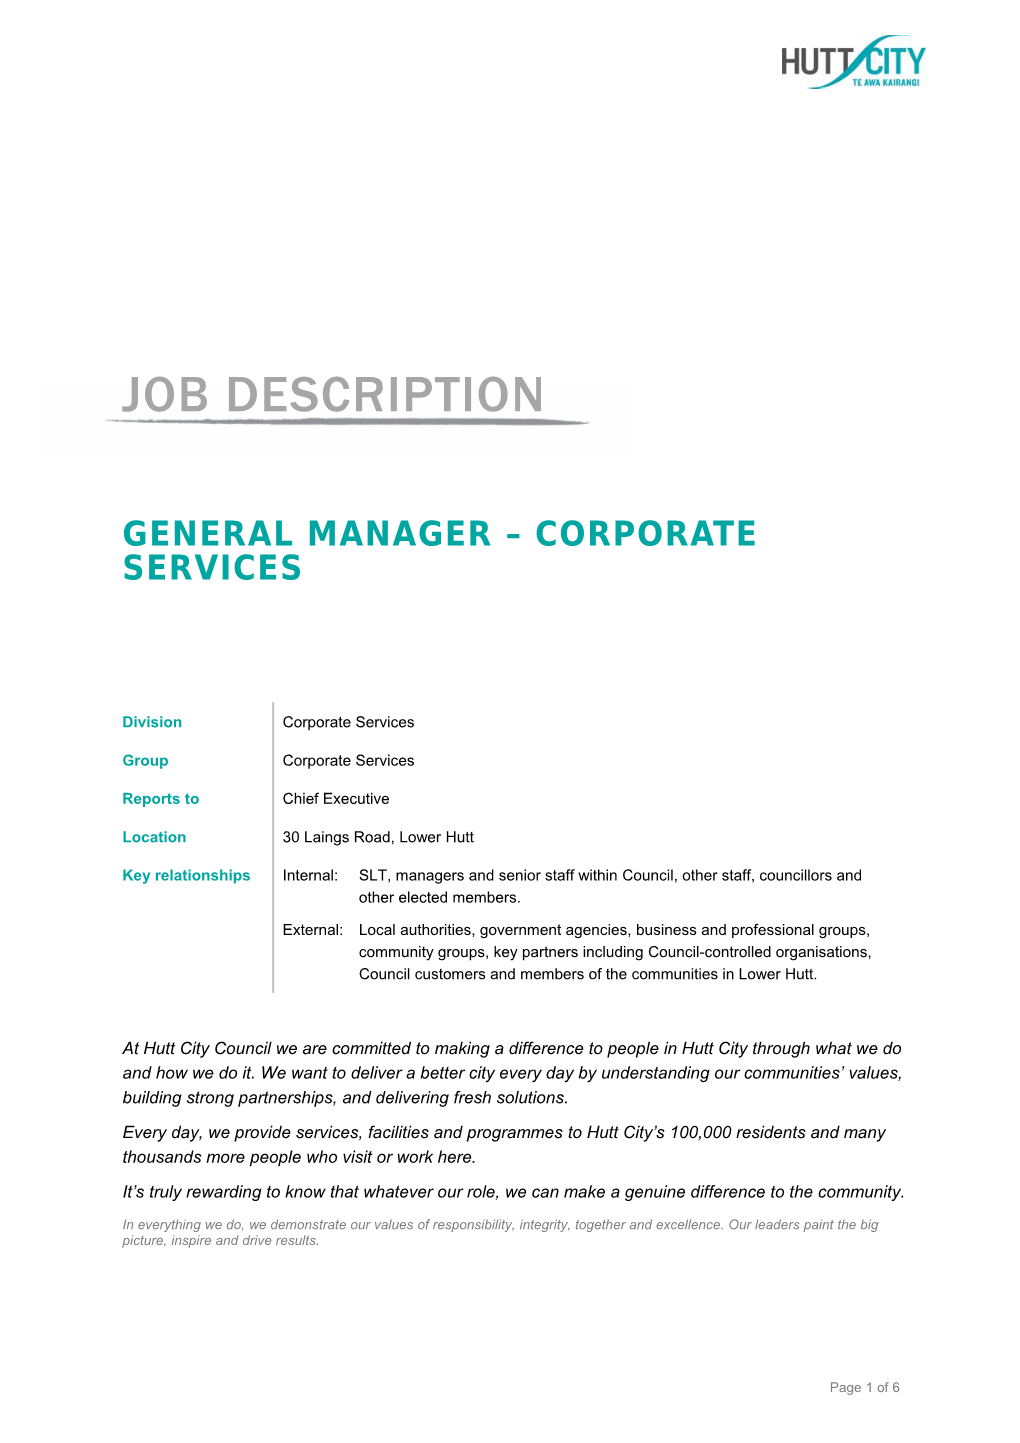 General Manager Corporate Services